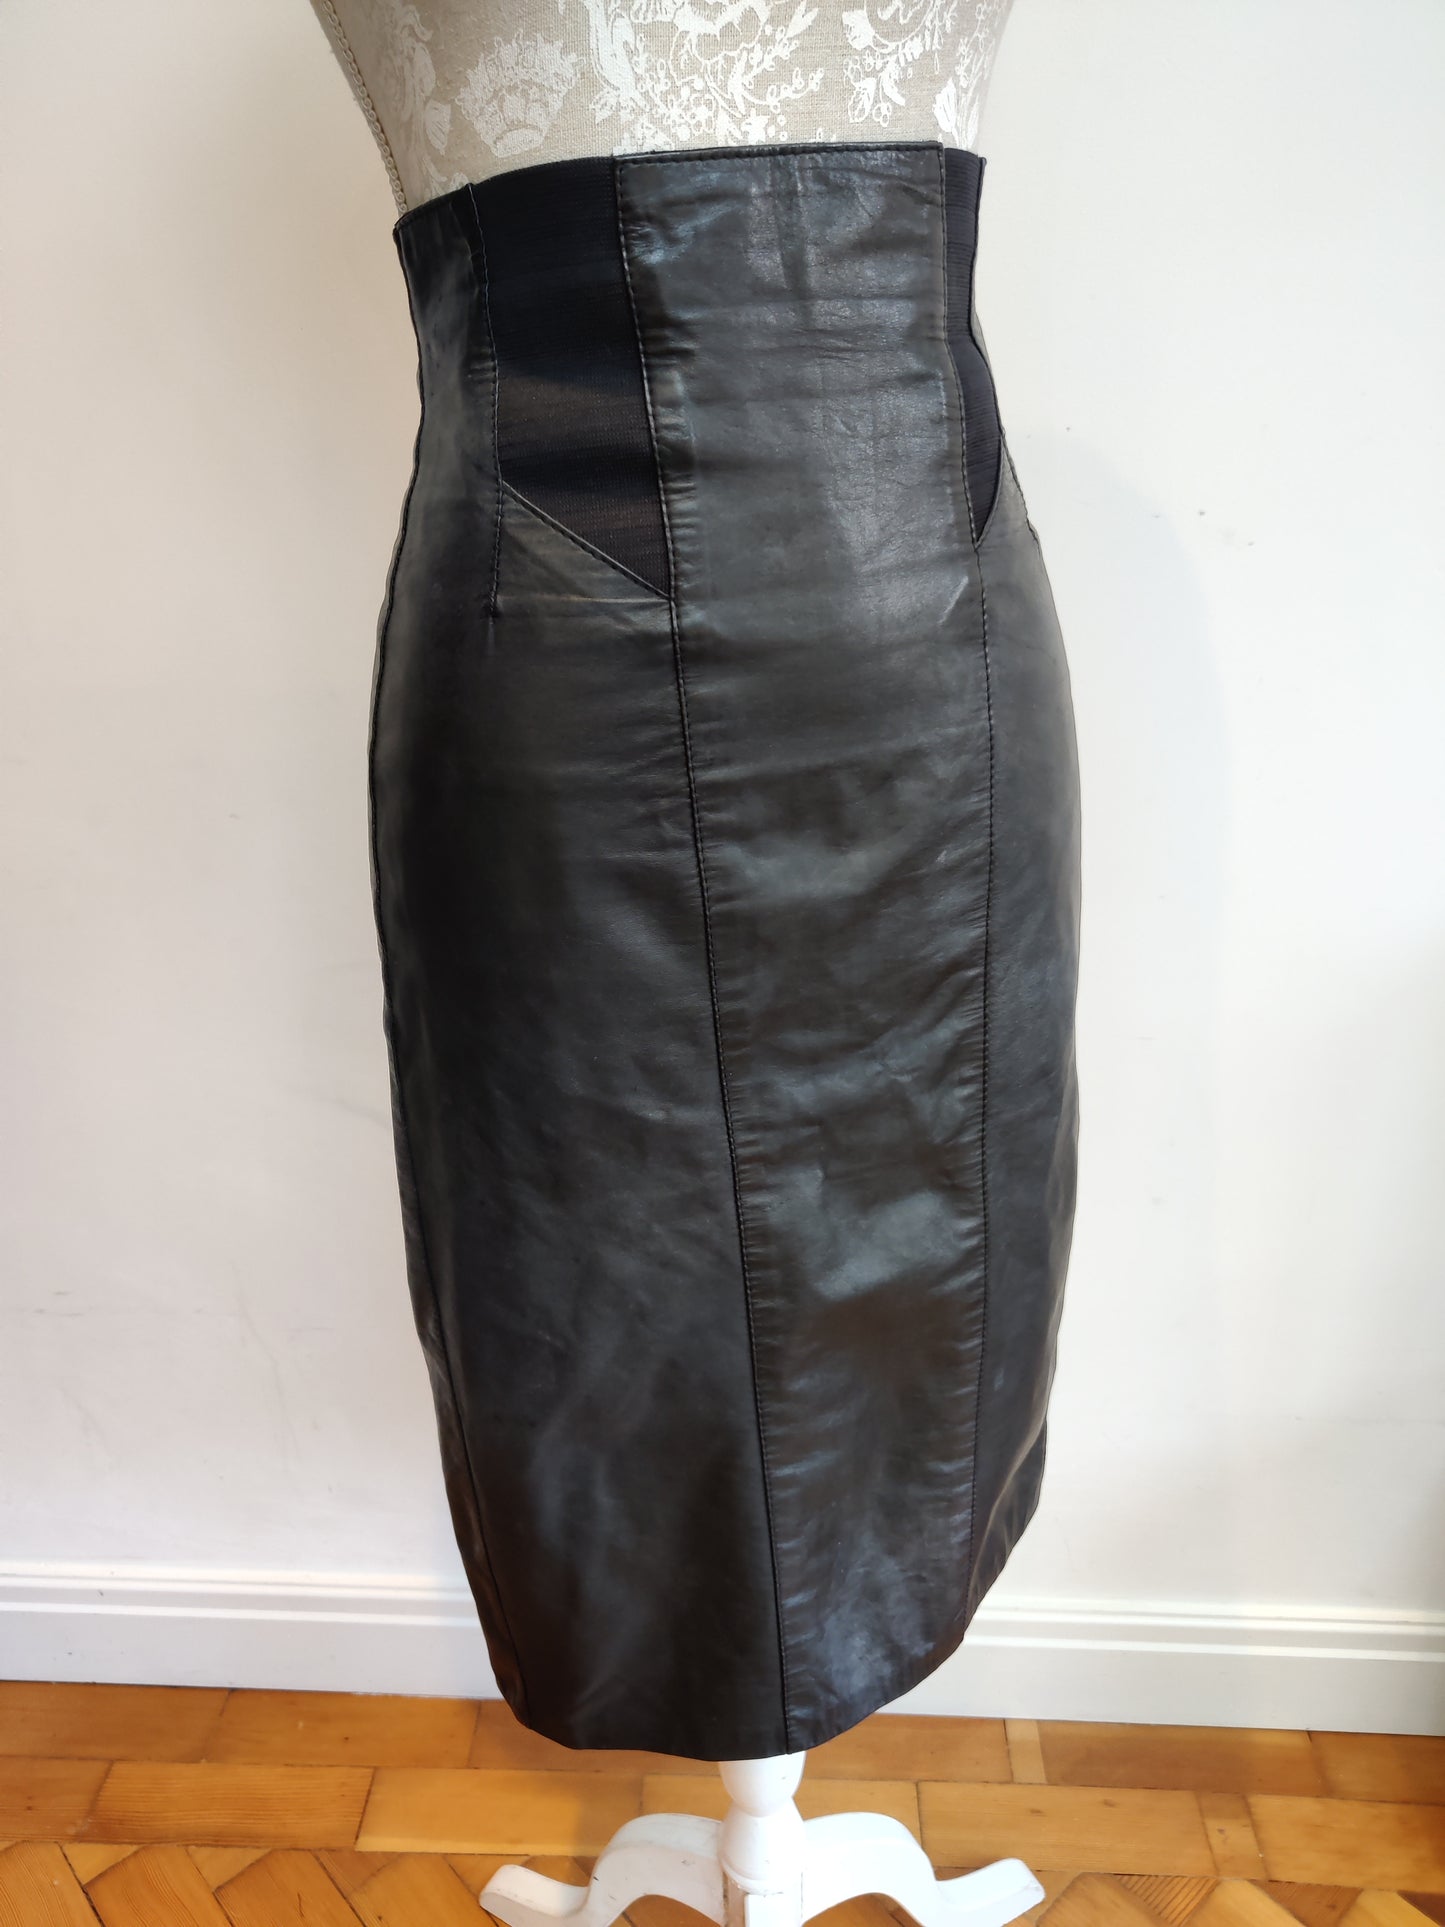 High waisted 80s leather pencil skirt. Size 6-8.